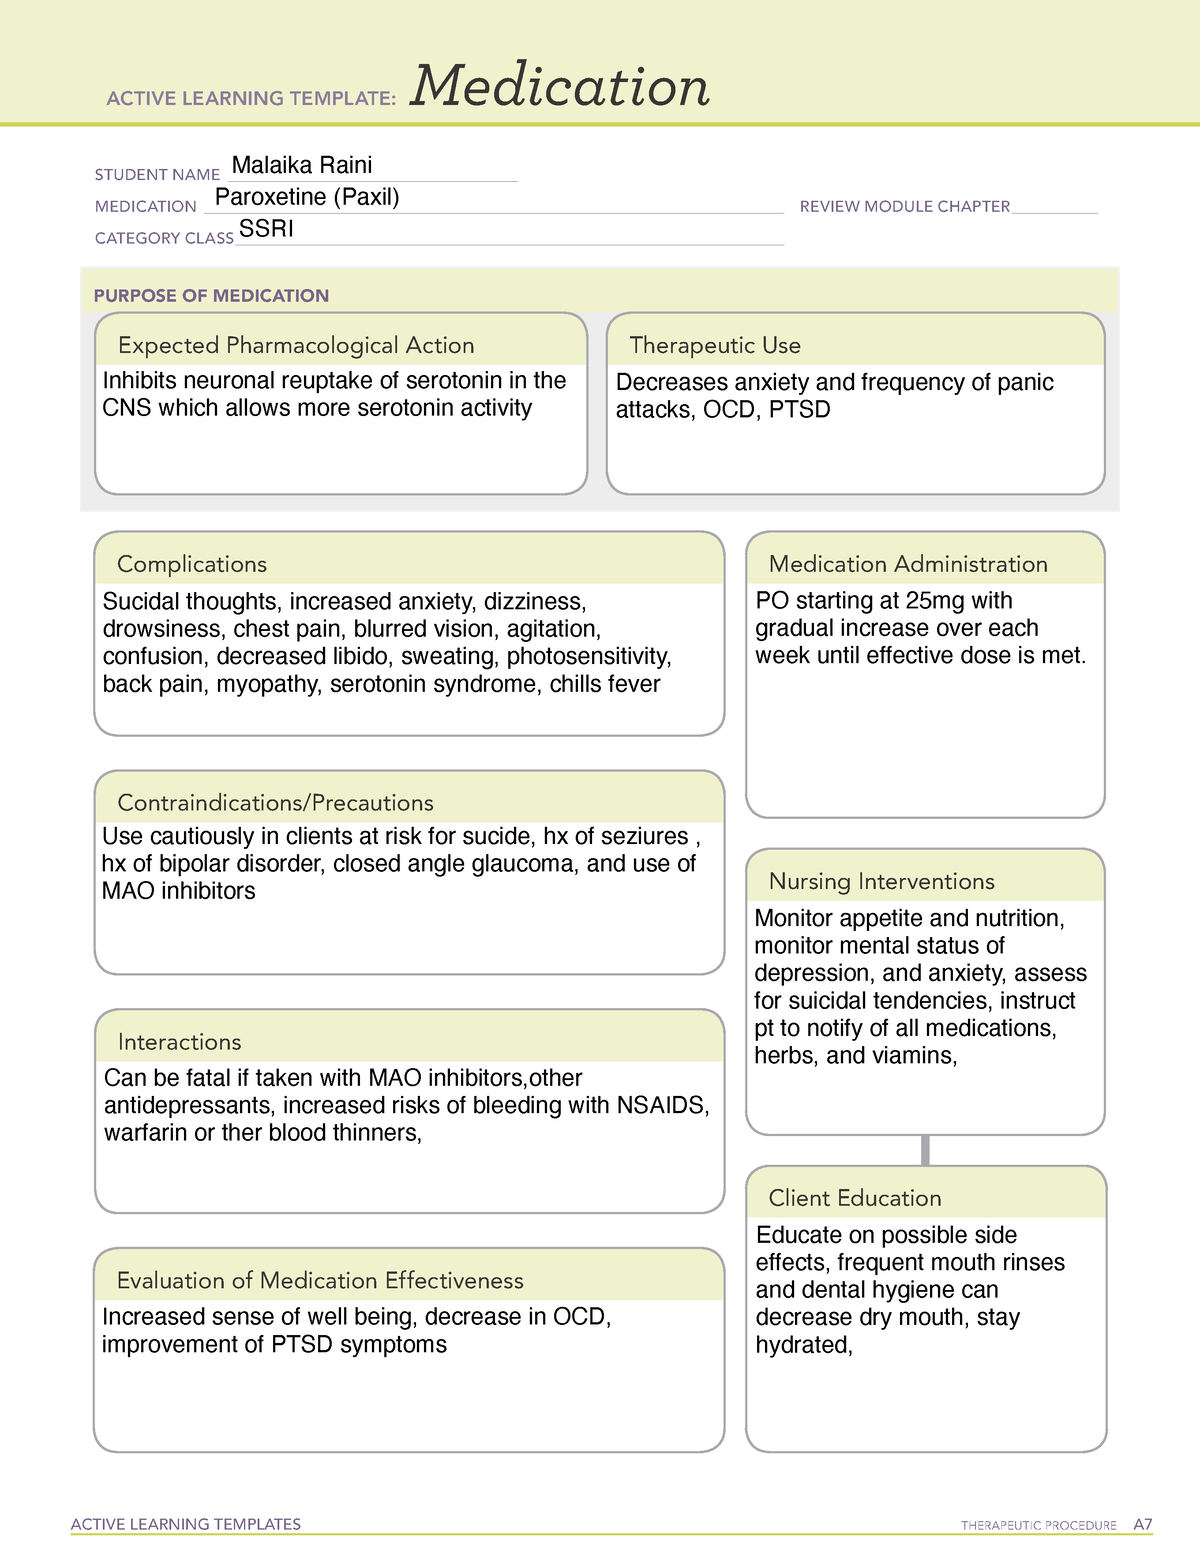 Active Learning Template medication5 ACTIVE LEARNING TEMPLATES